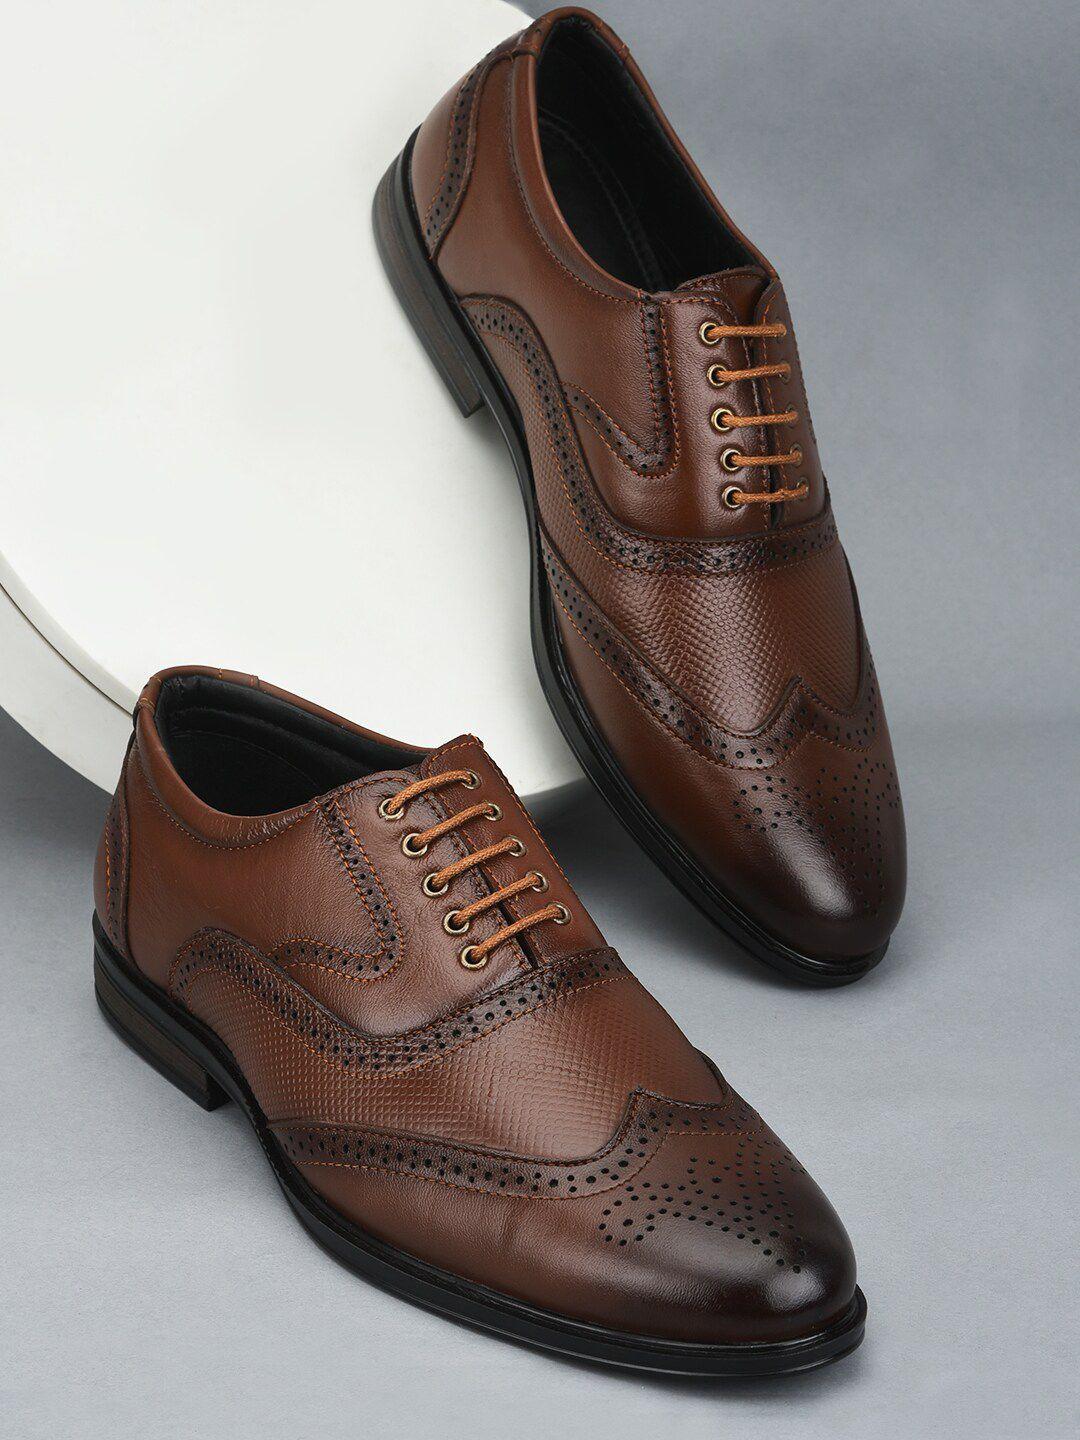 liberty-men-textured-leather-formal-brogues